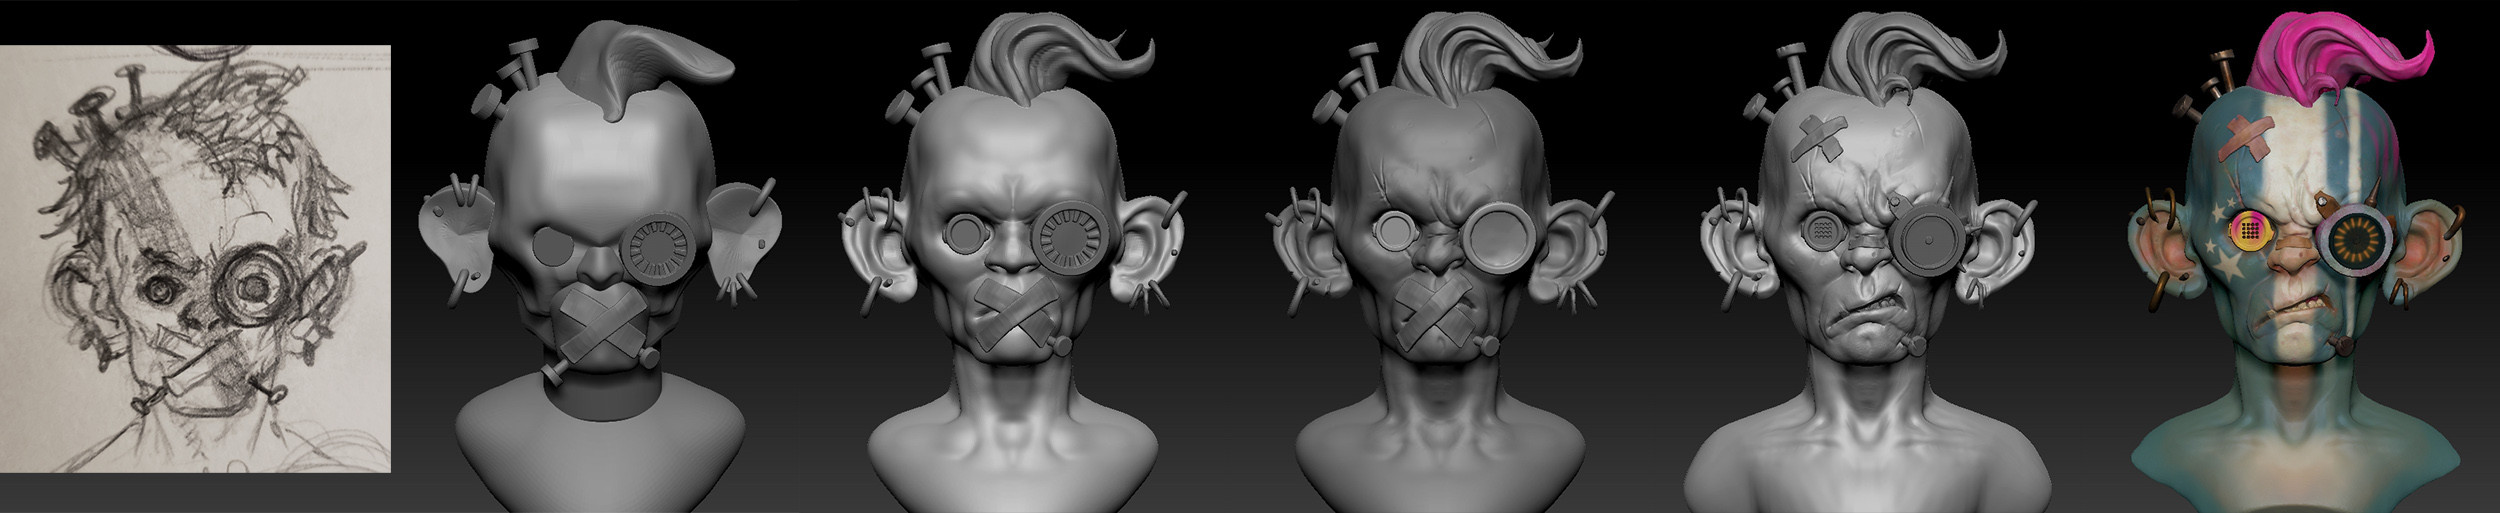  Zbrush 5day challenge steps